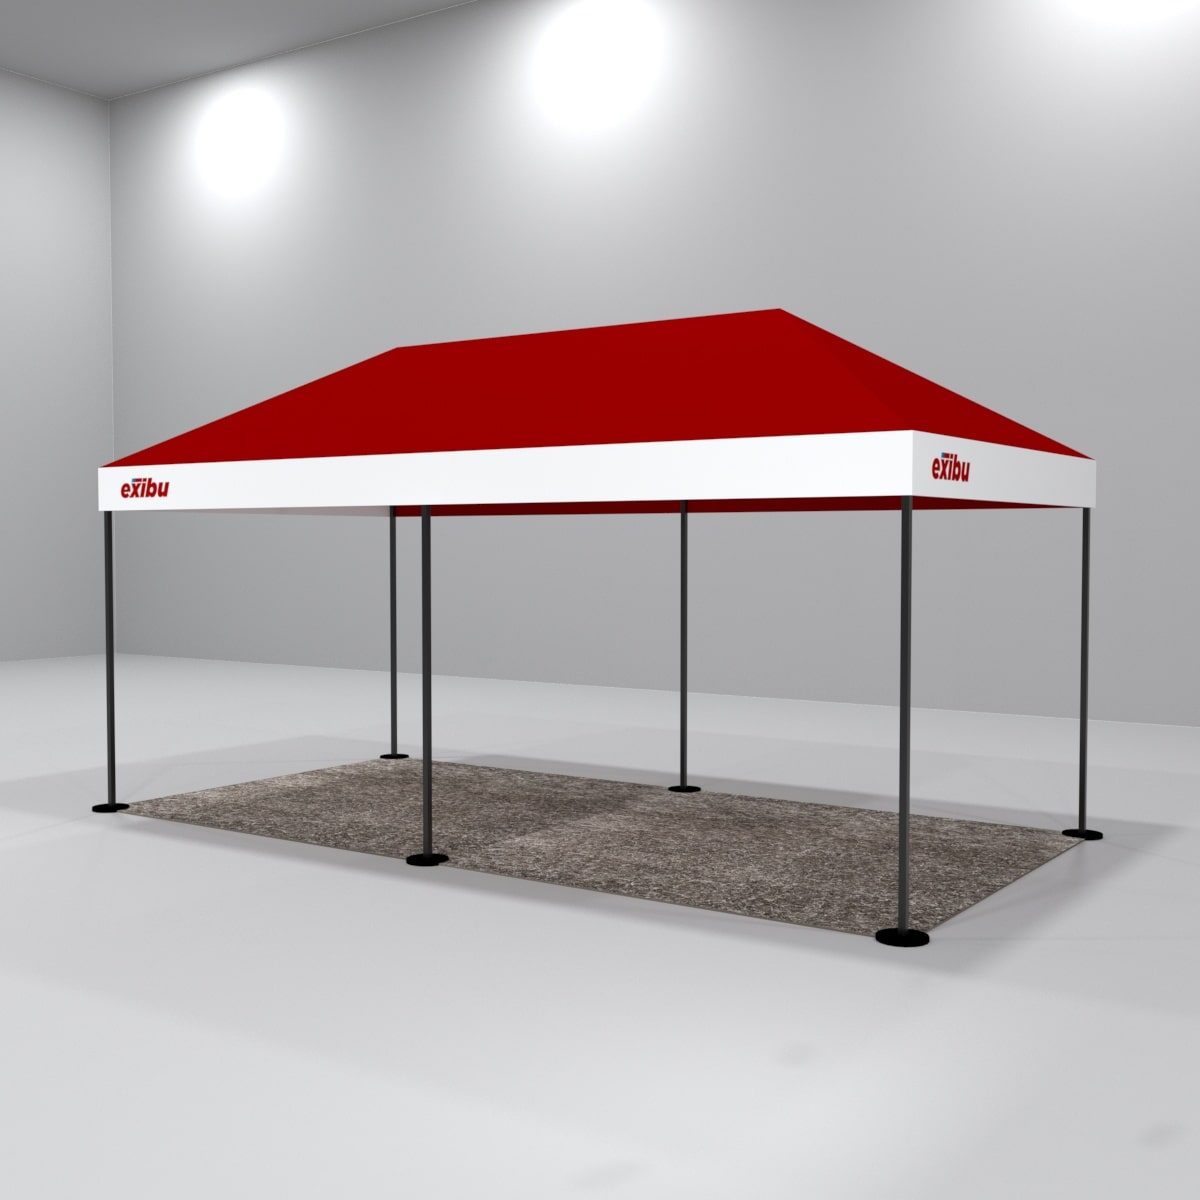 Promotional canopy tents